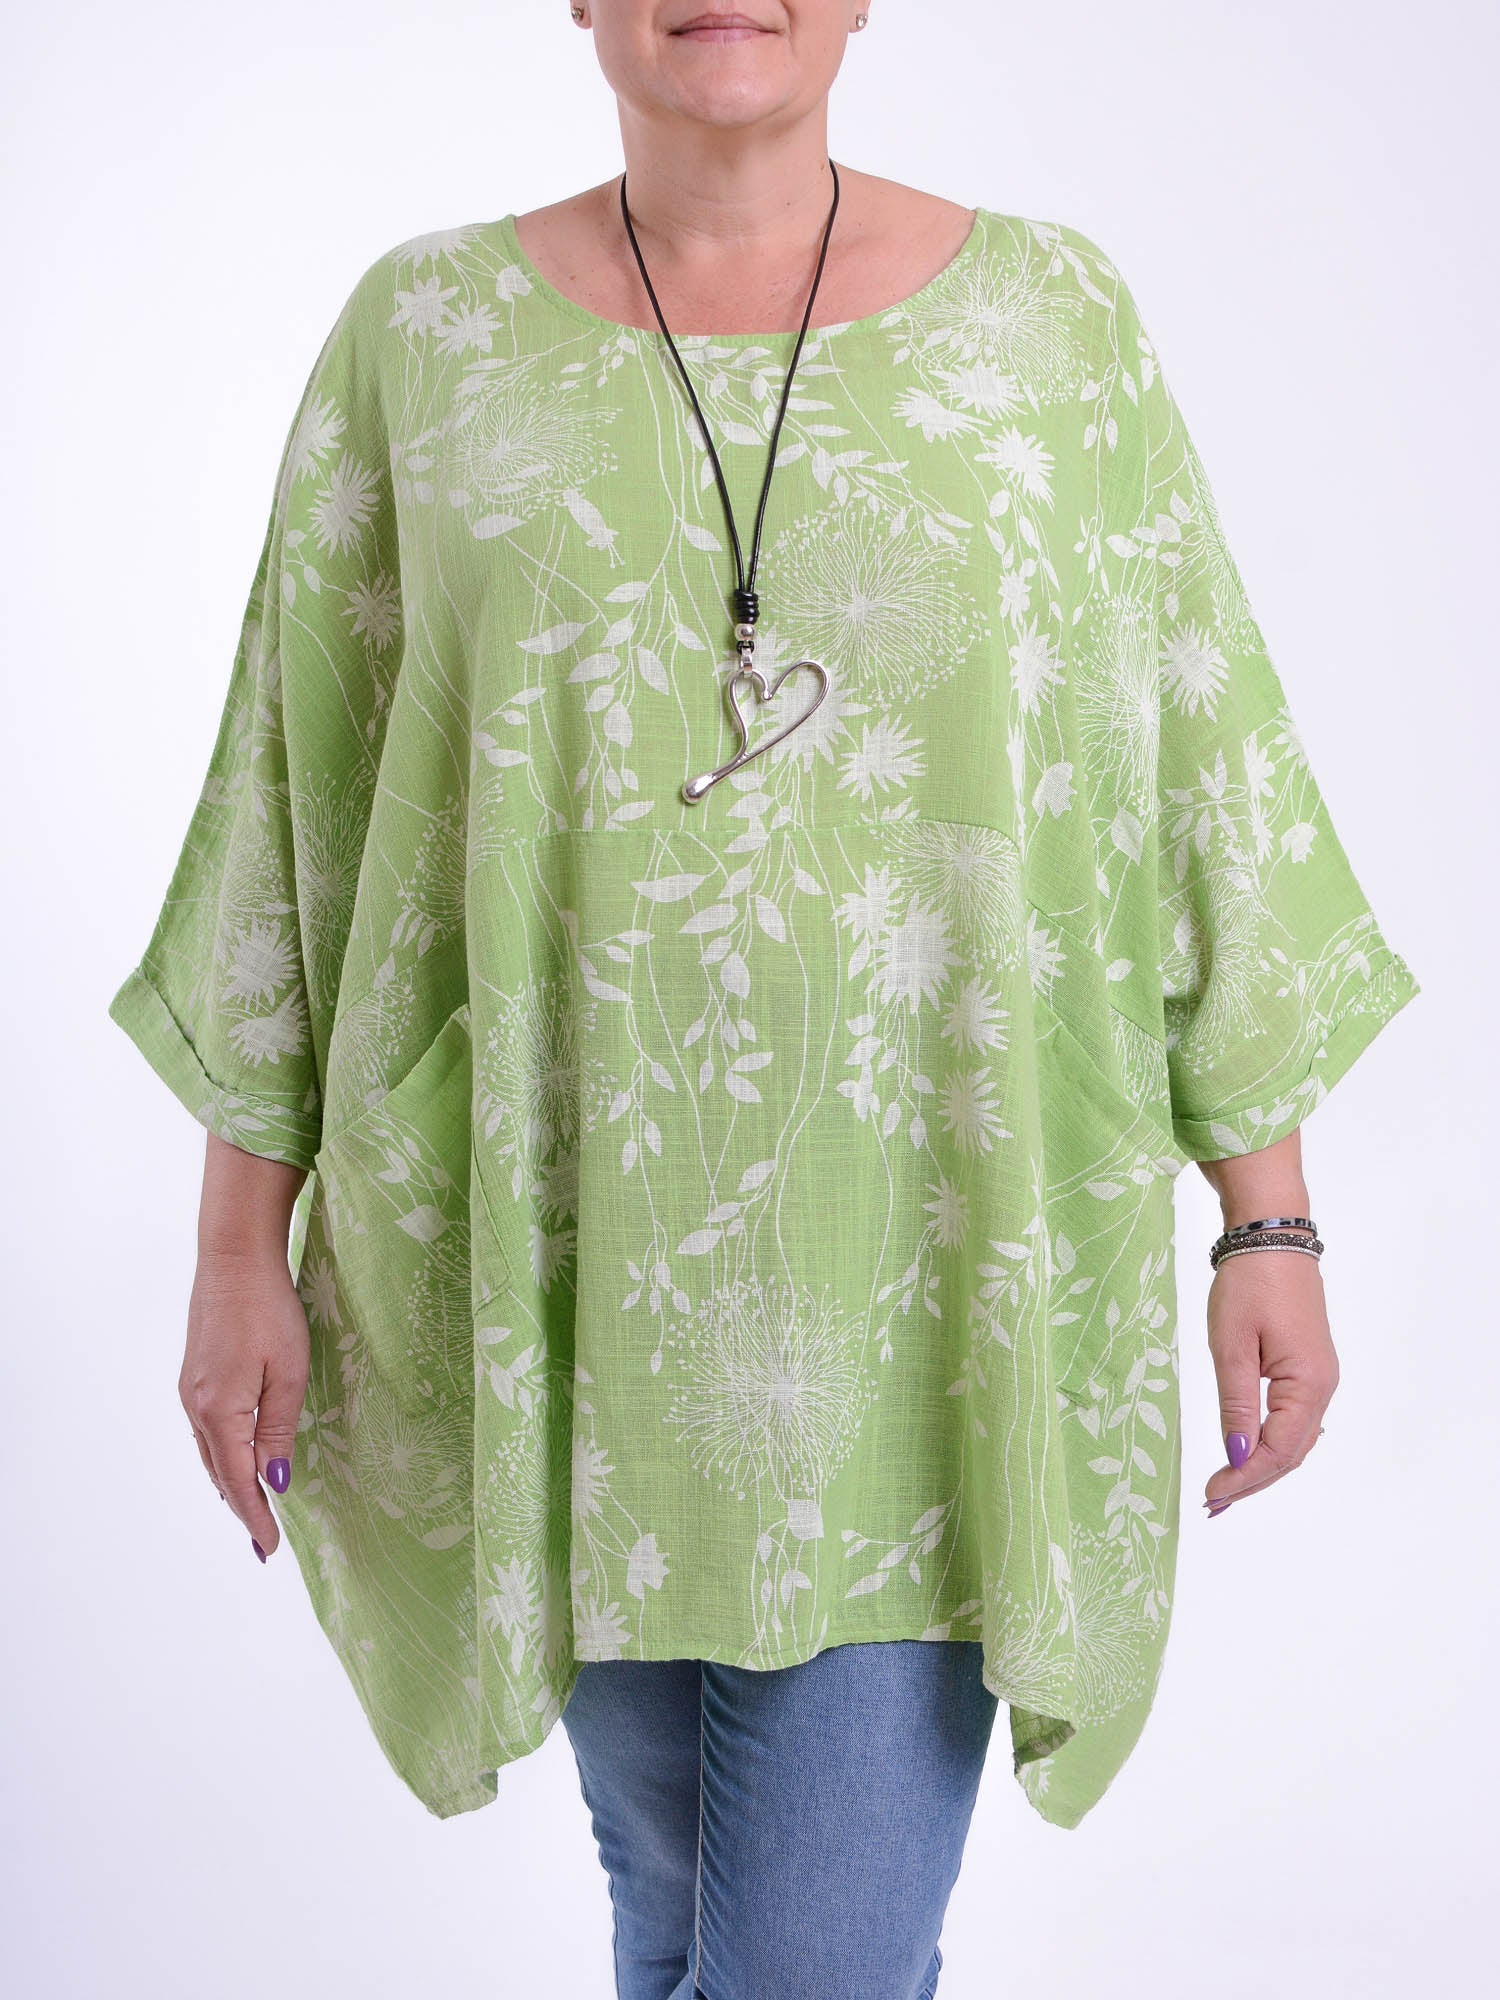 Lagenlook Oversized Cotton Tunic - 10077 FLORAL, Tops & Shirts, Pure Plus Clothing, Lagenlook Clothing, Plus Size Fashion, Over 50 Fashion